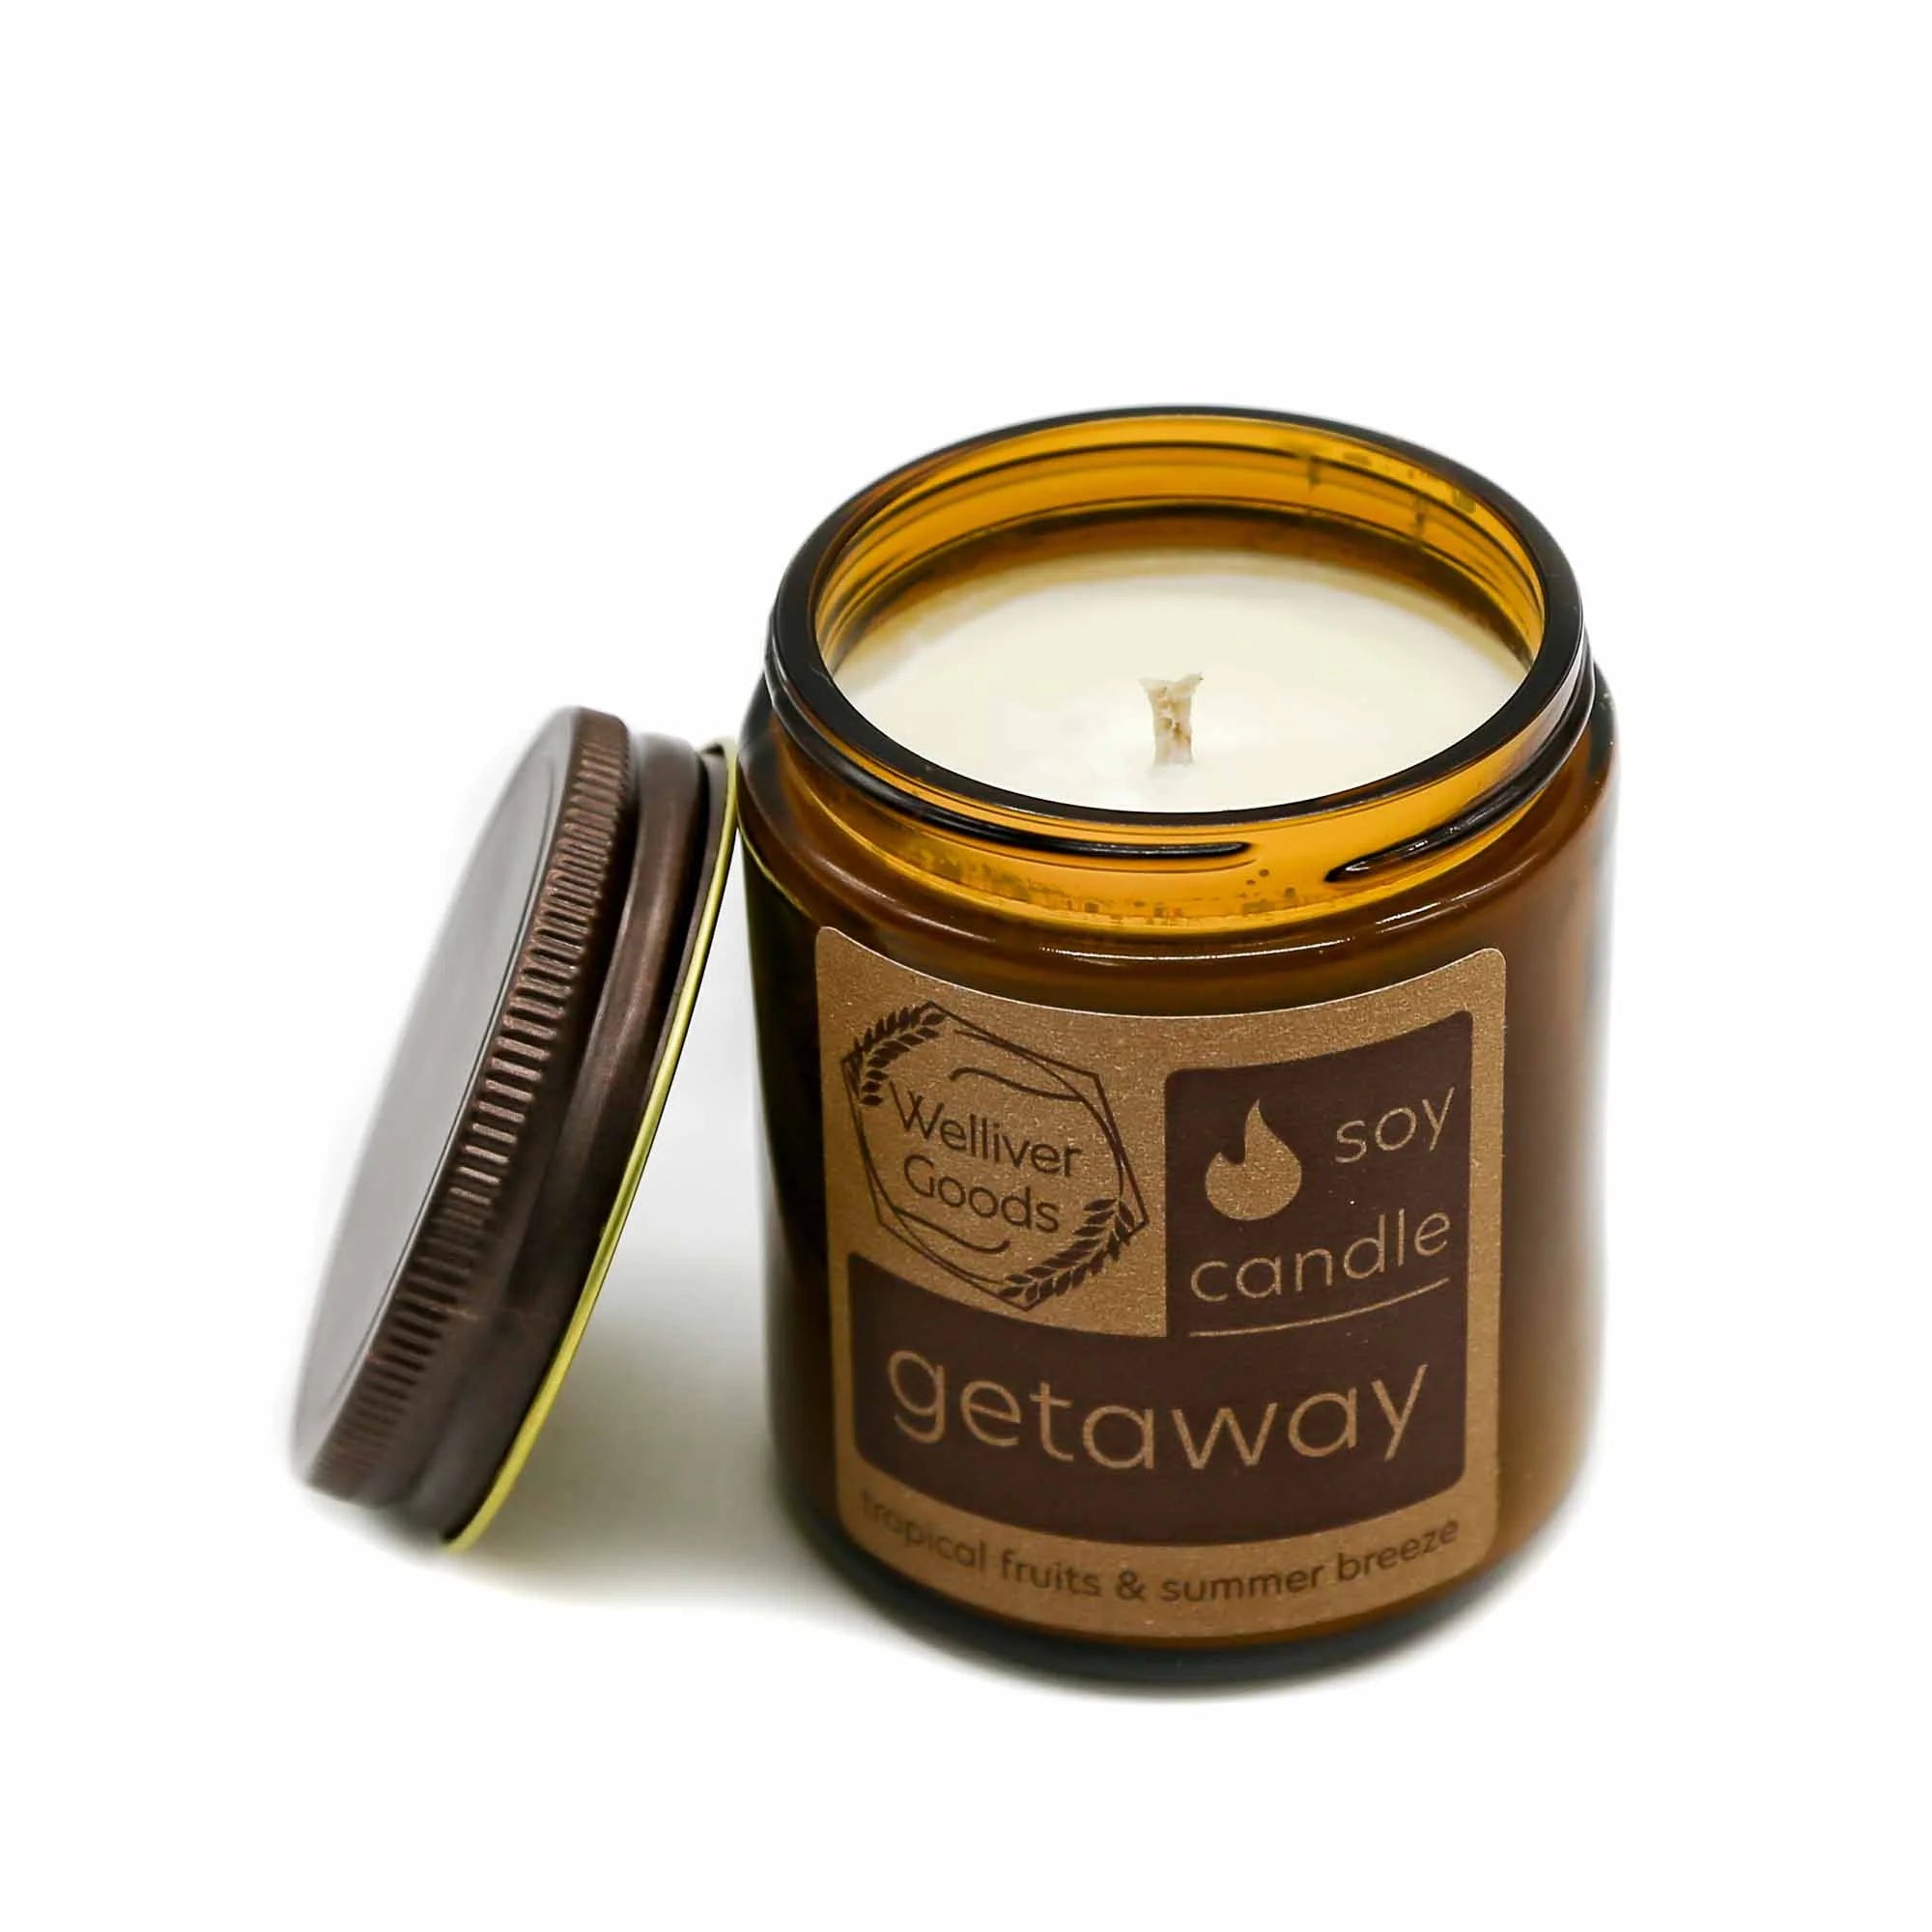 welliver goods candle - getaway - Mortise And Tenon